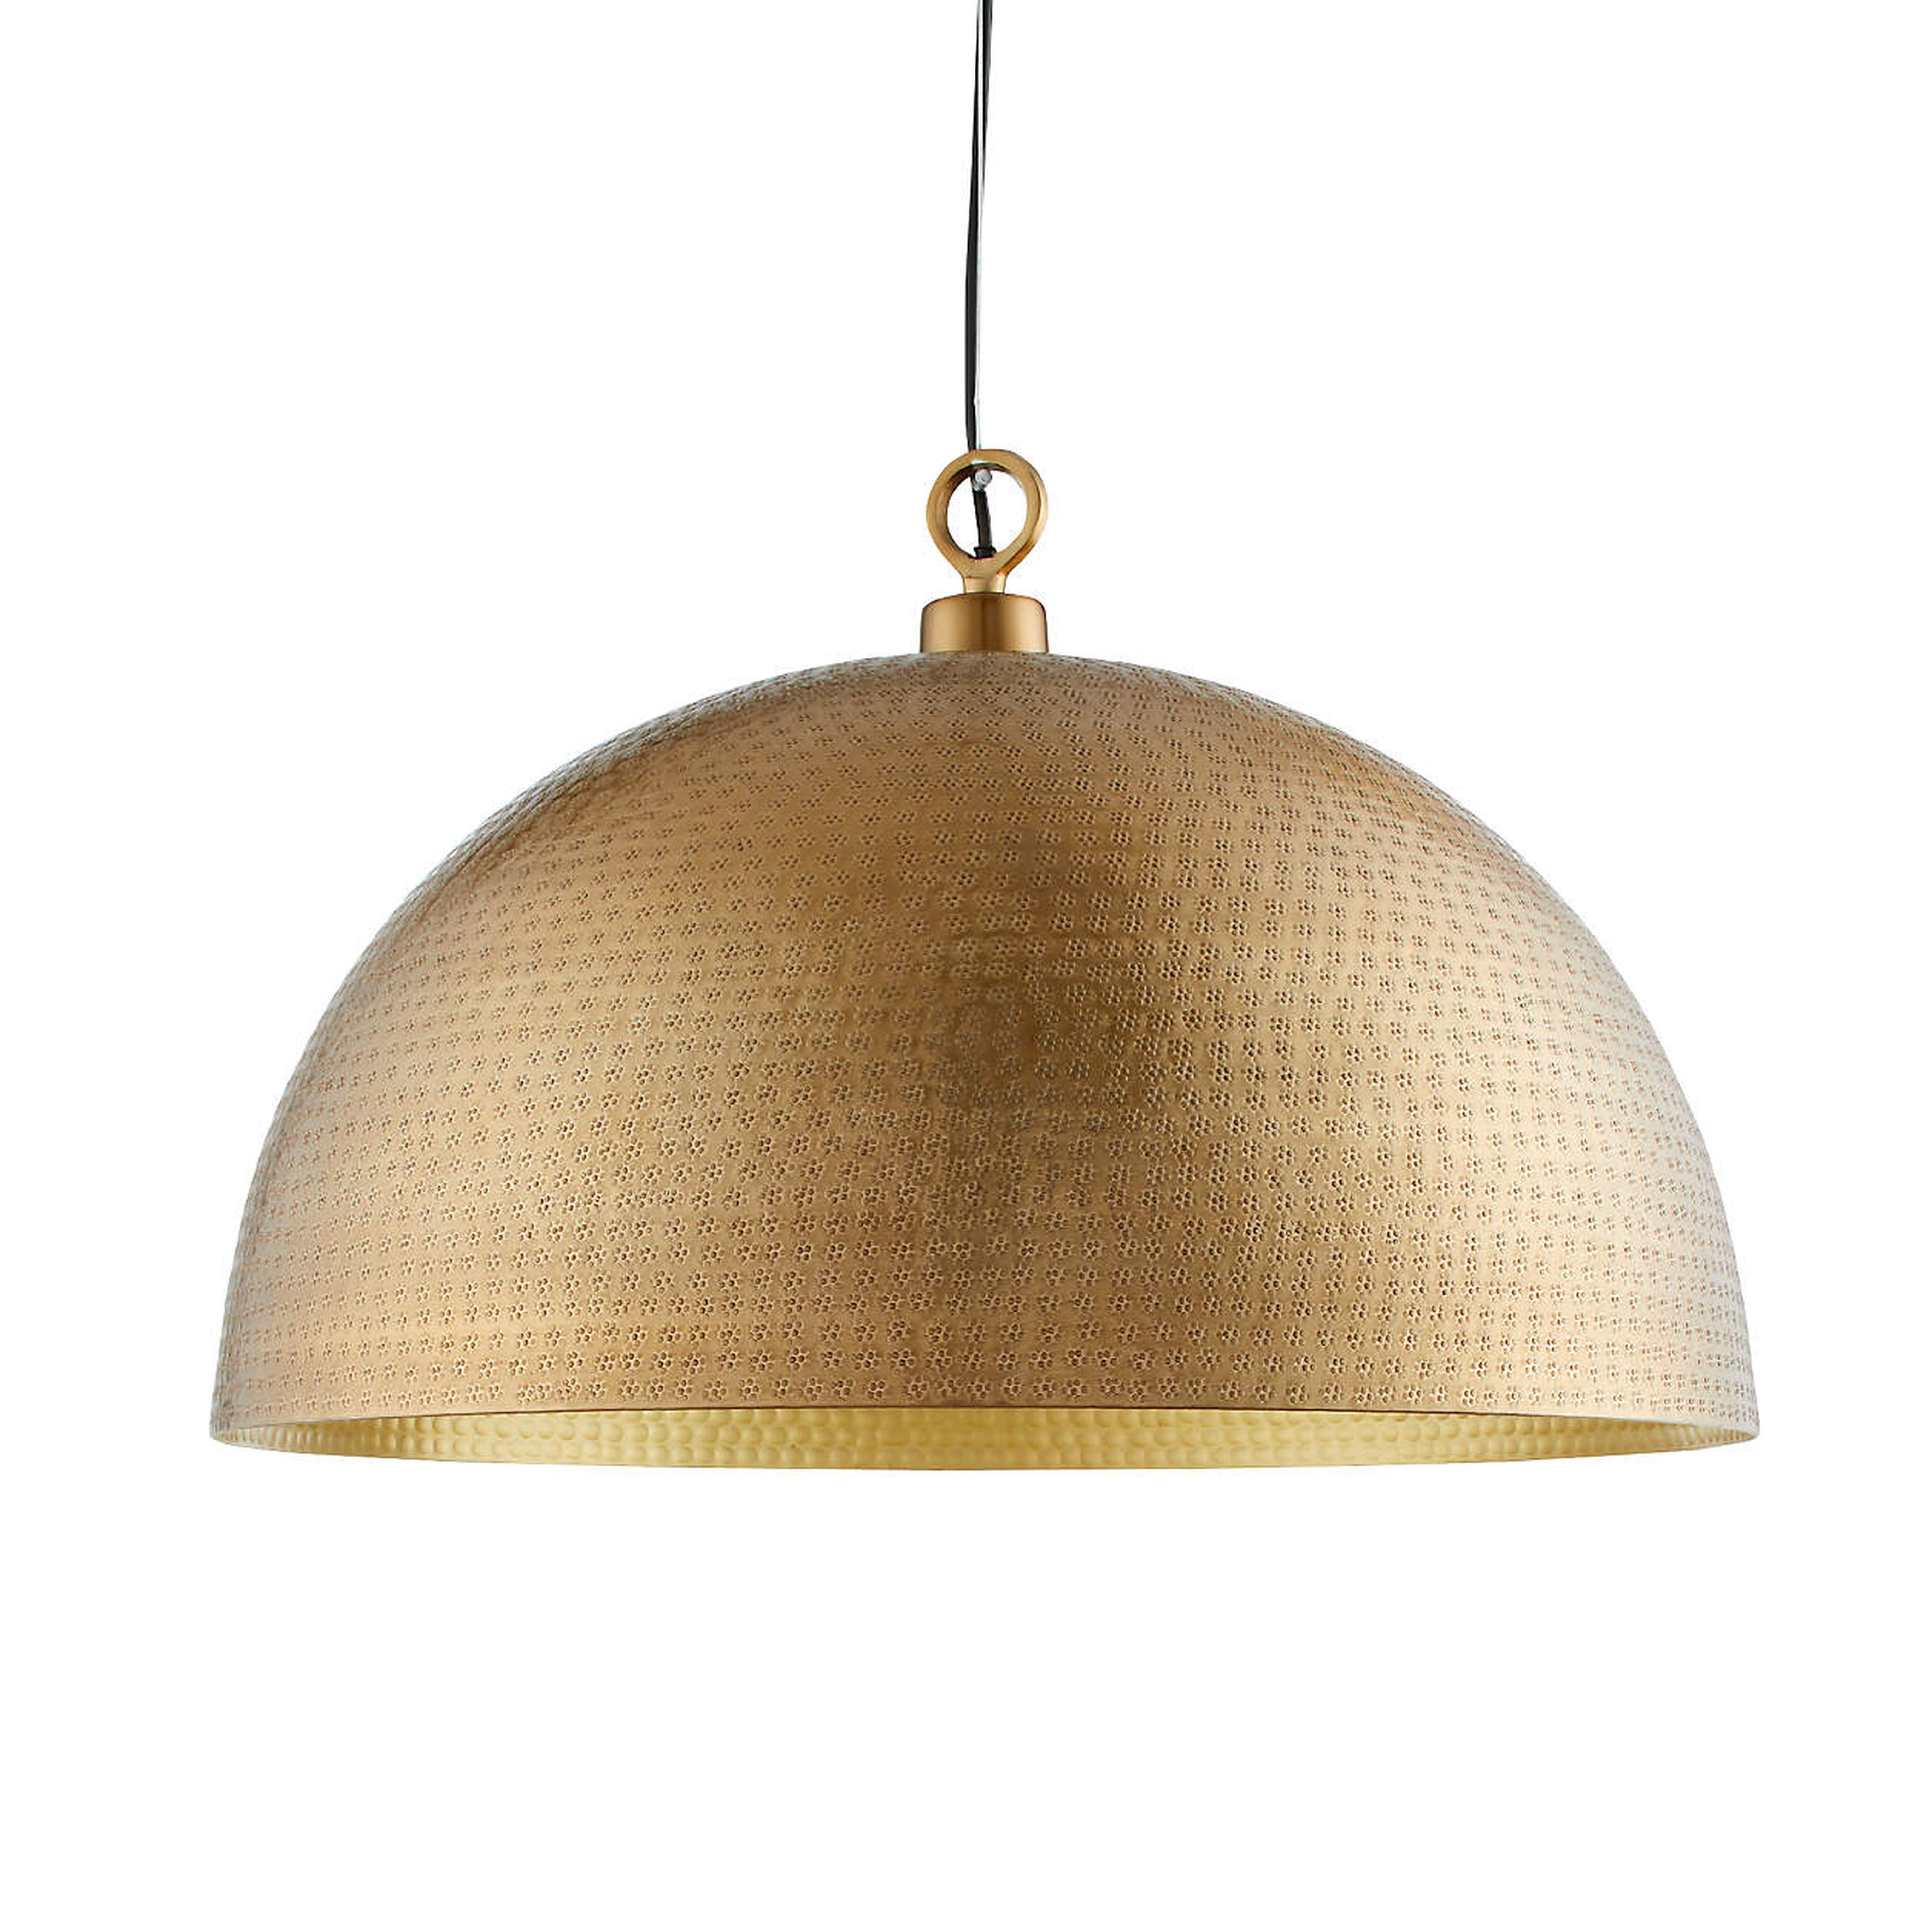 Rodan Hammered Brass Metal Dome Pendant Light - Crate and Barrel